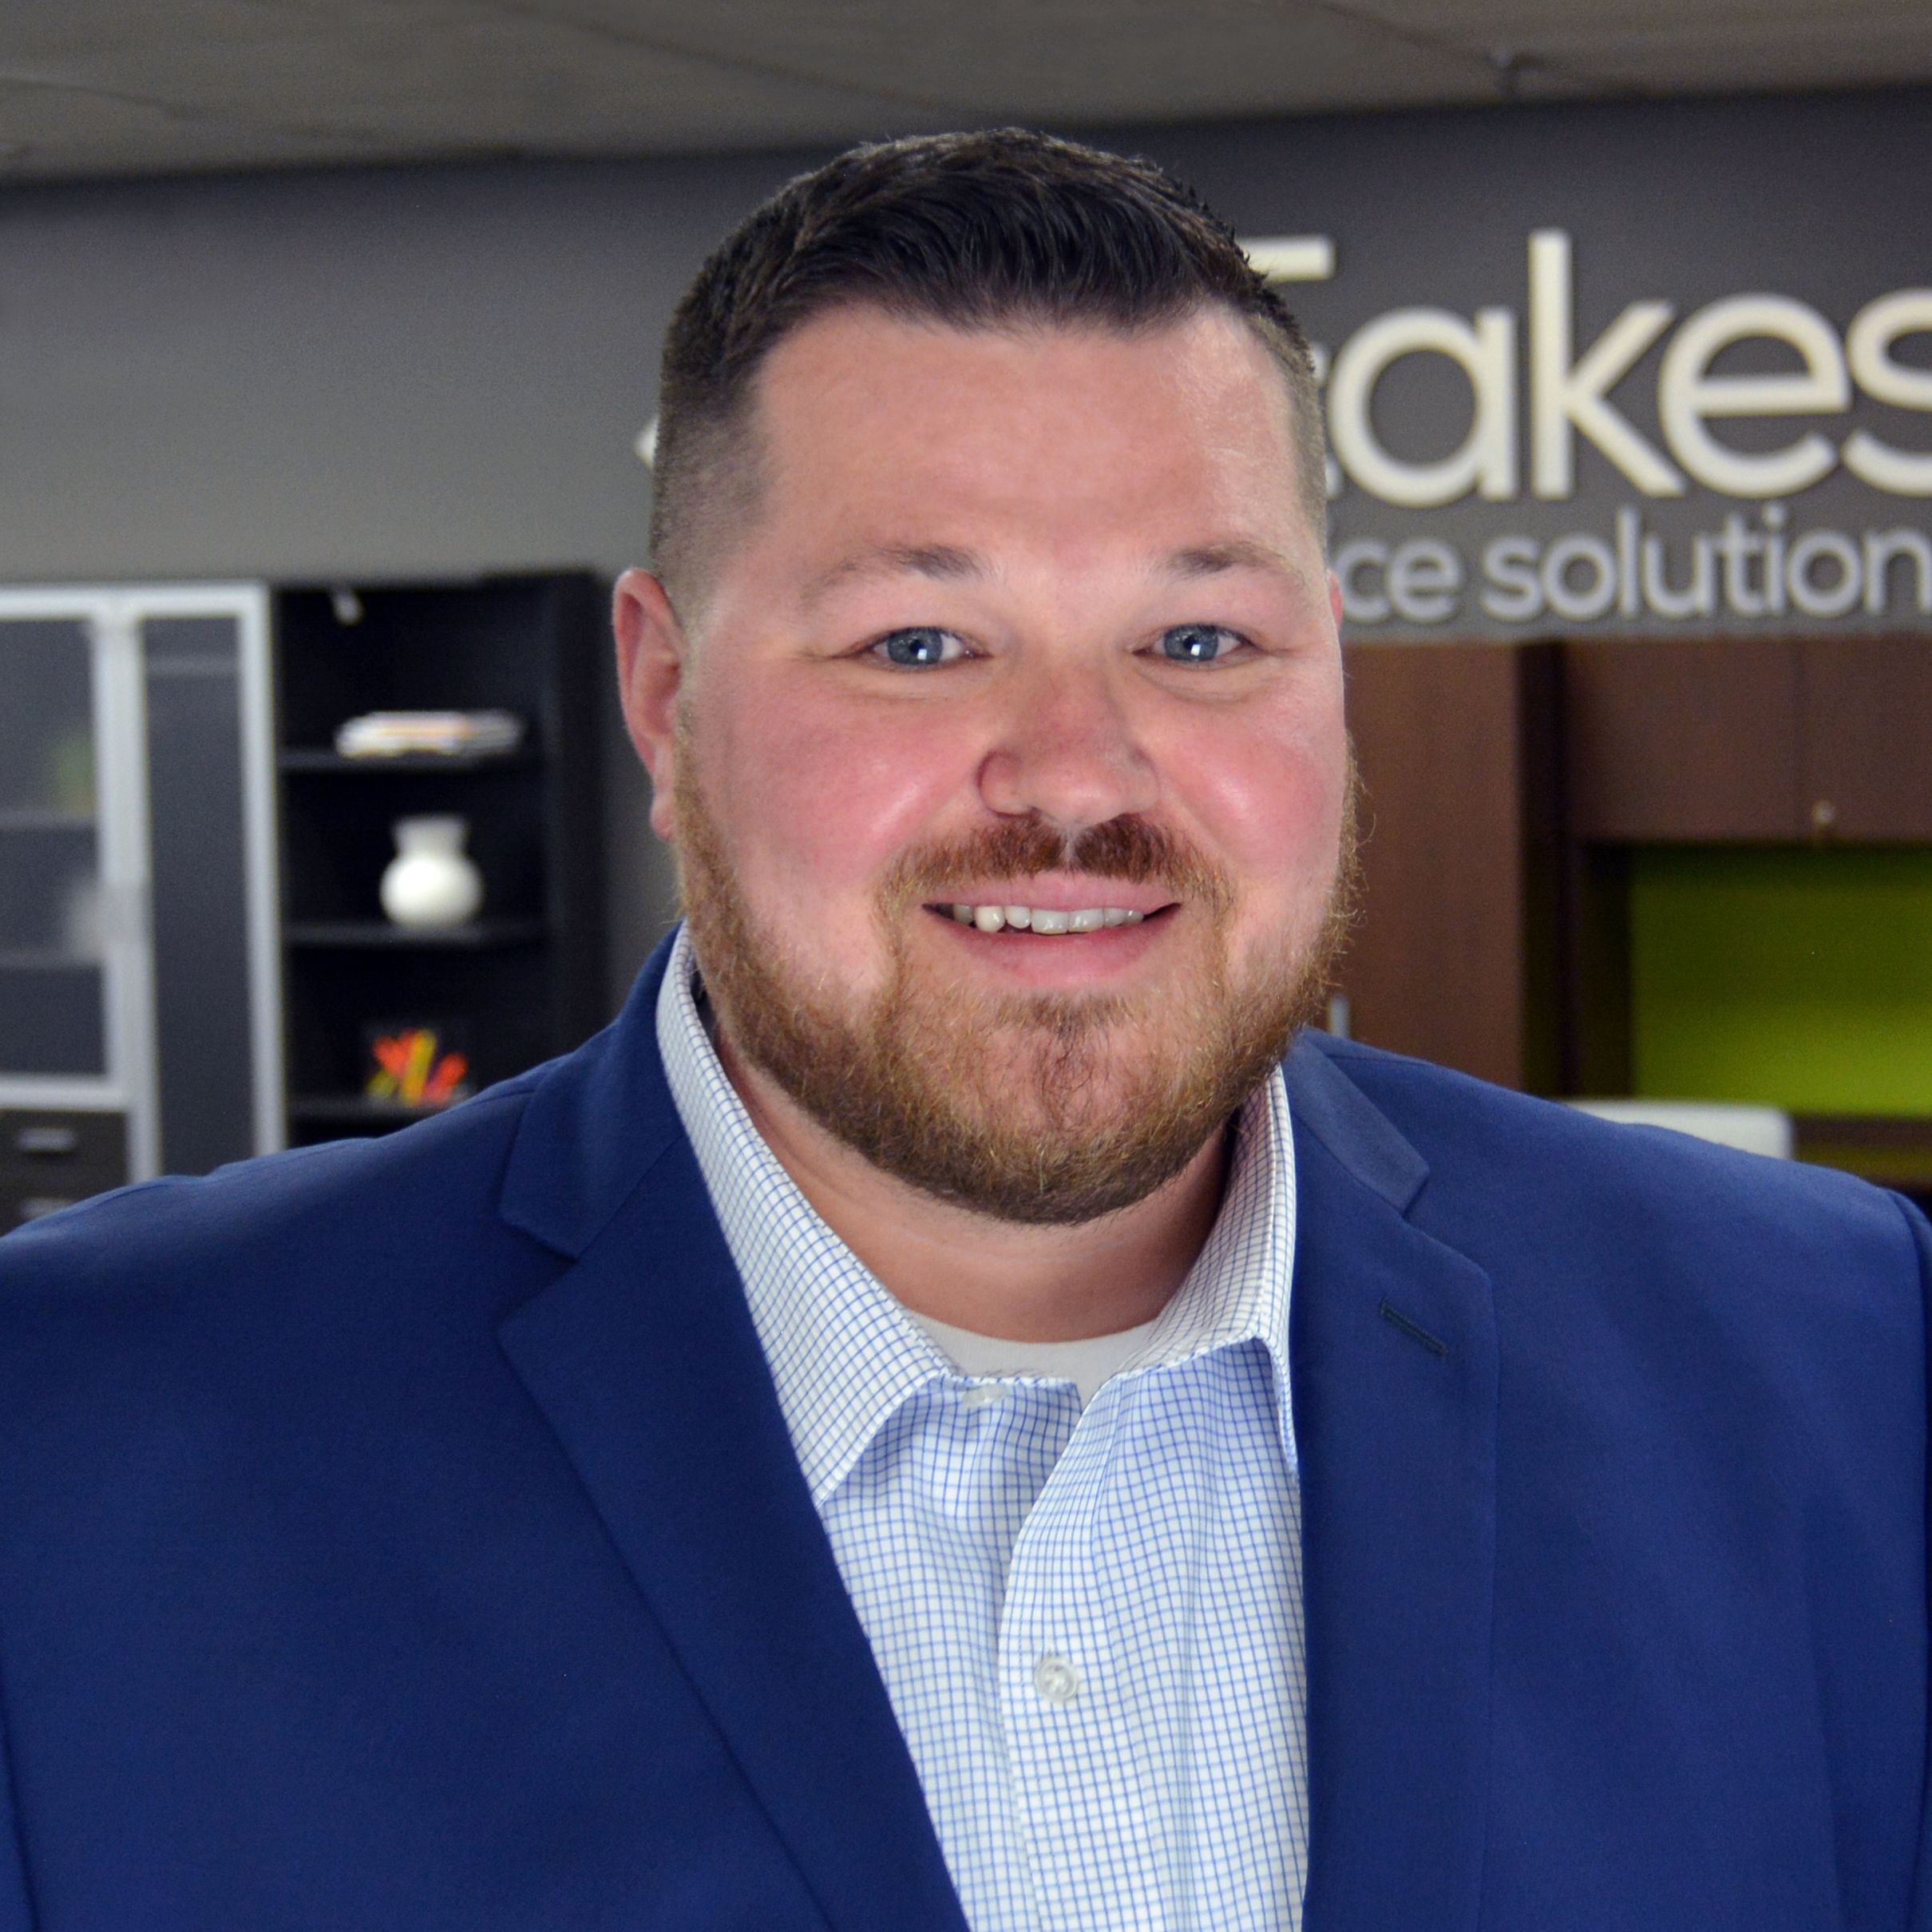 Eakes Office Solutions Announces Michael Anderson as Sales Manager